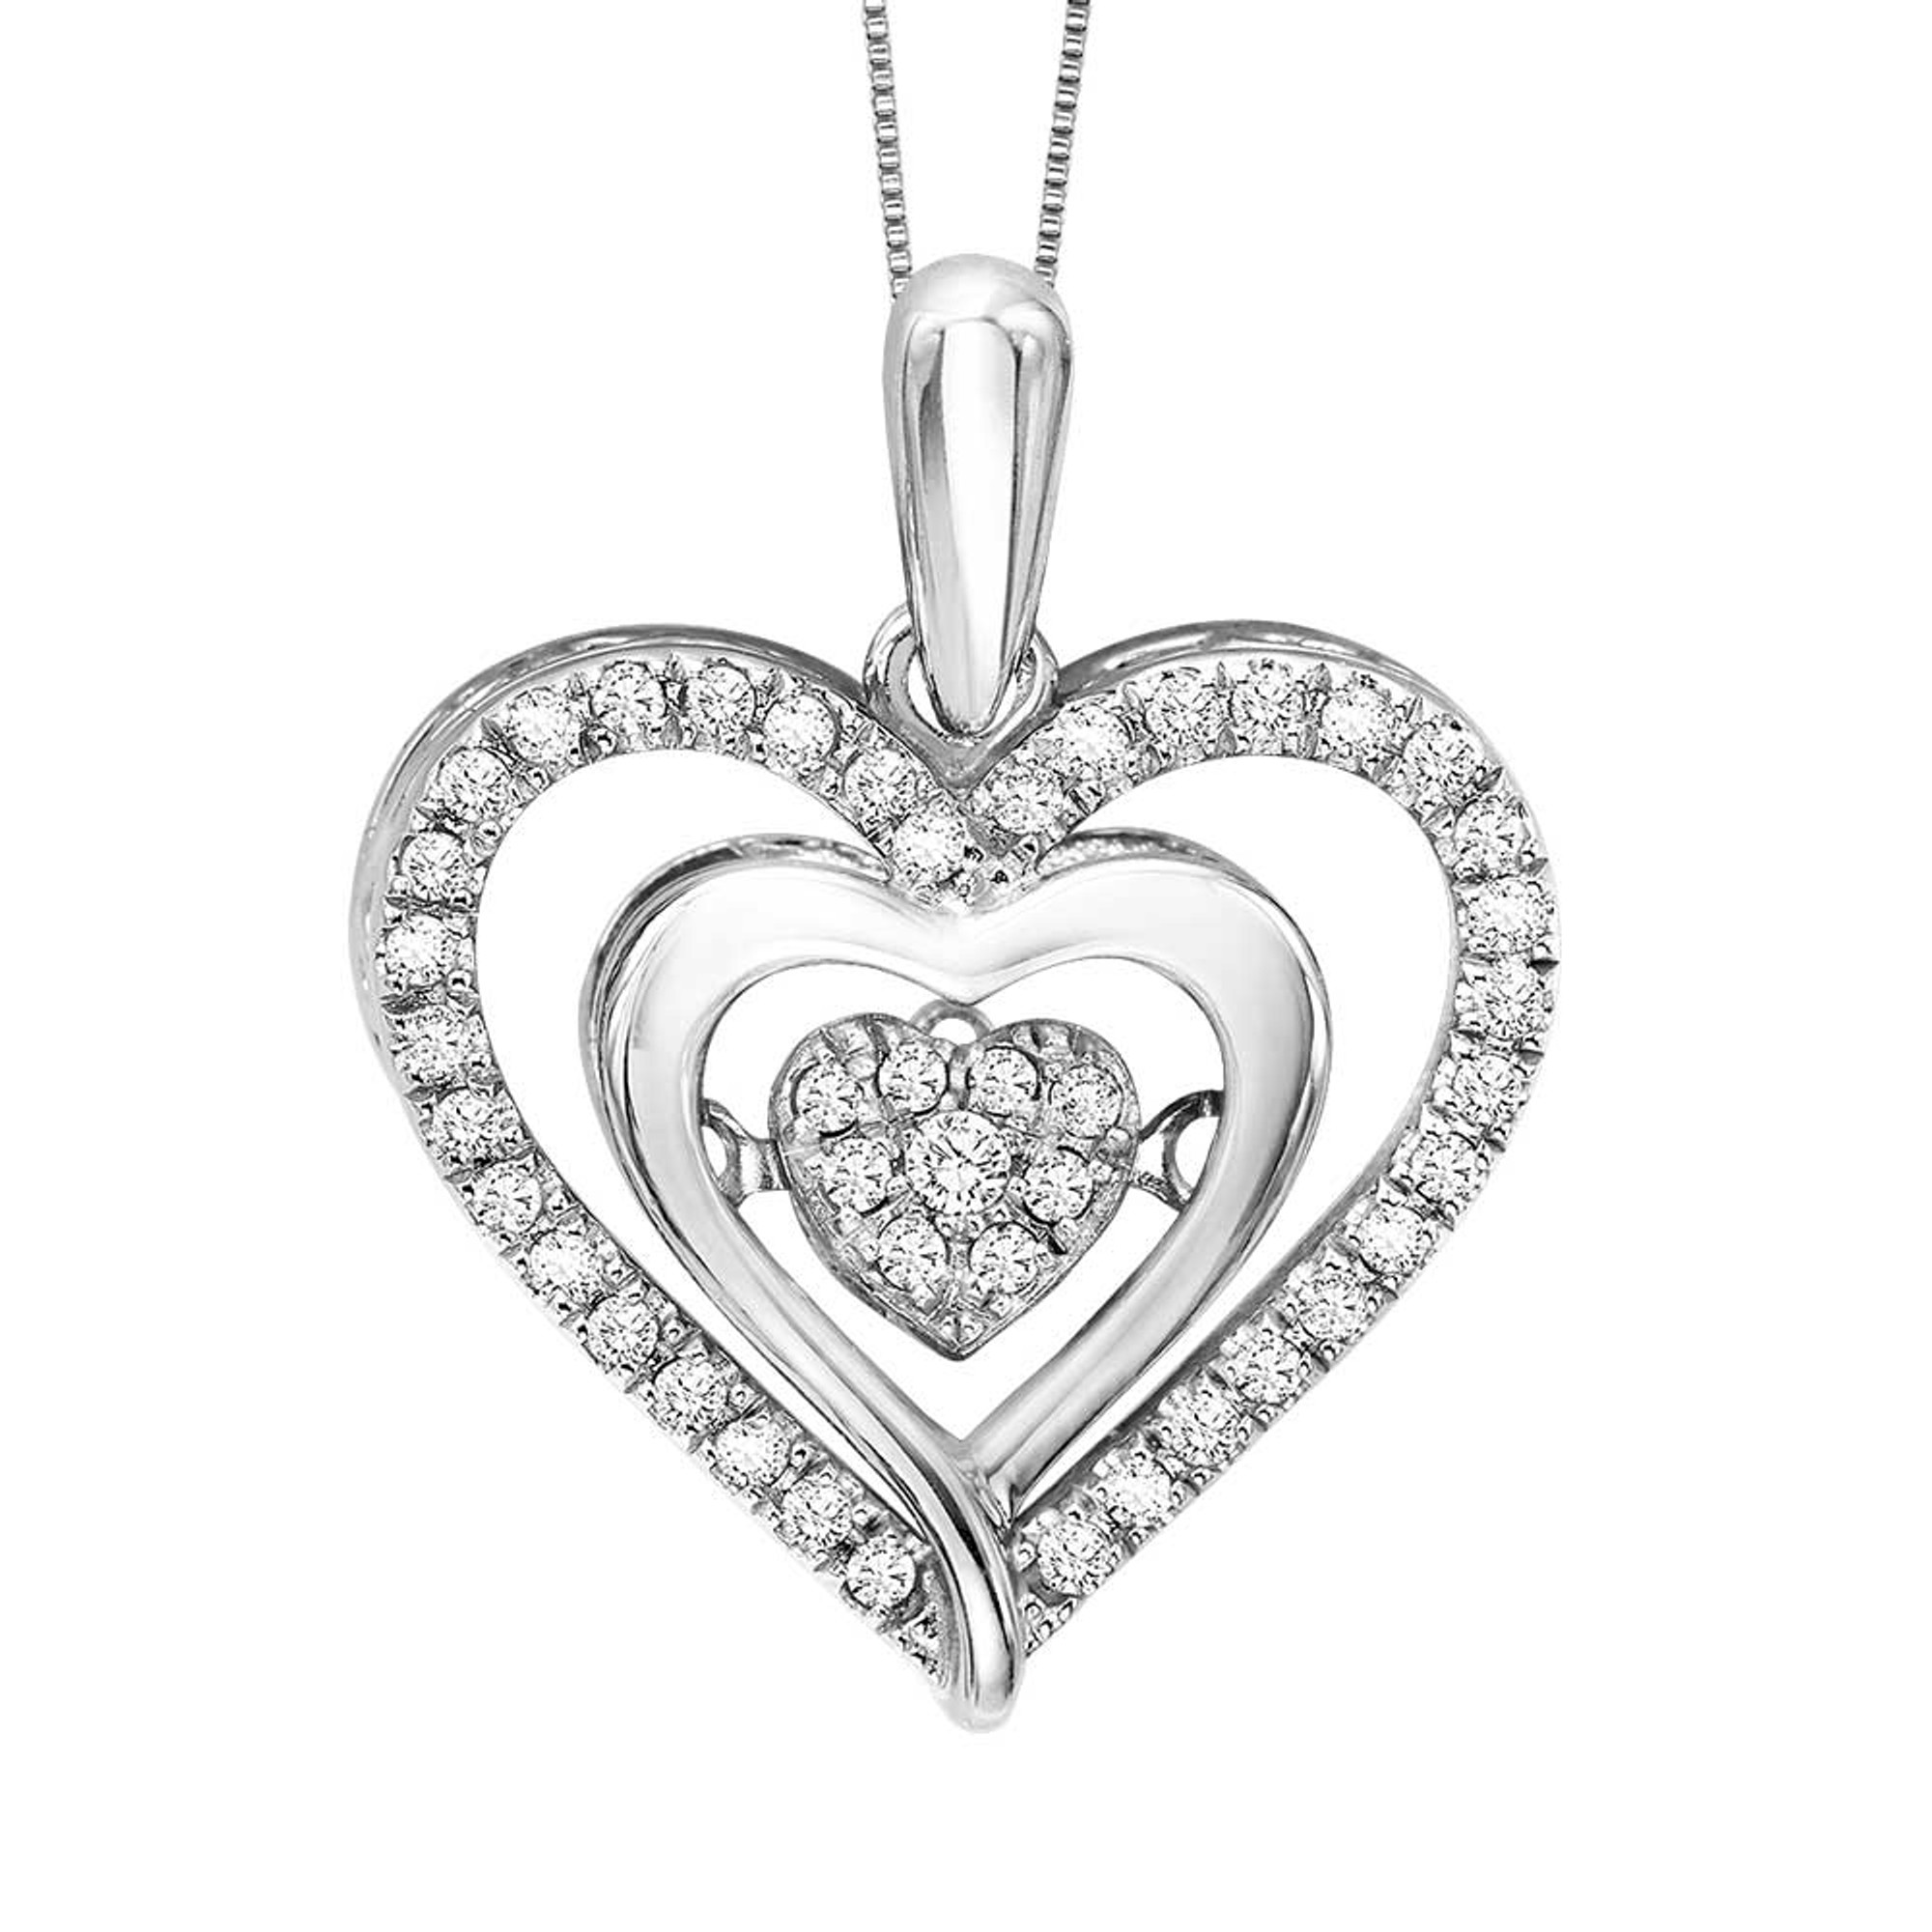 Buy Women's 925 Sterling Silver Twisted Heart with Stone Pendant Necklace